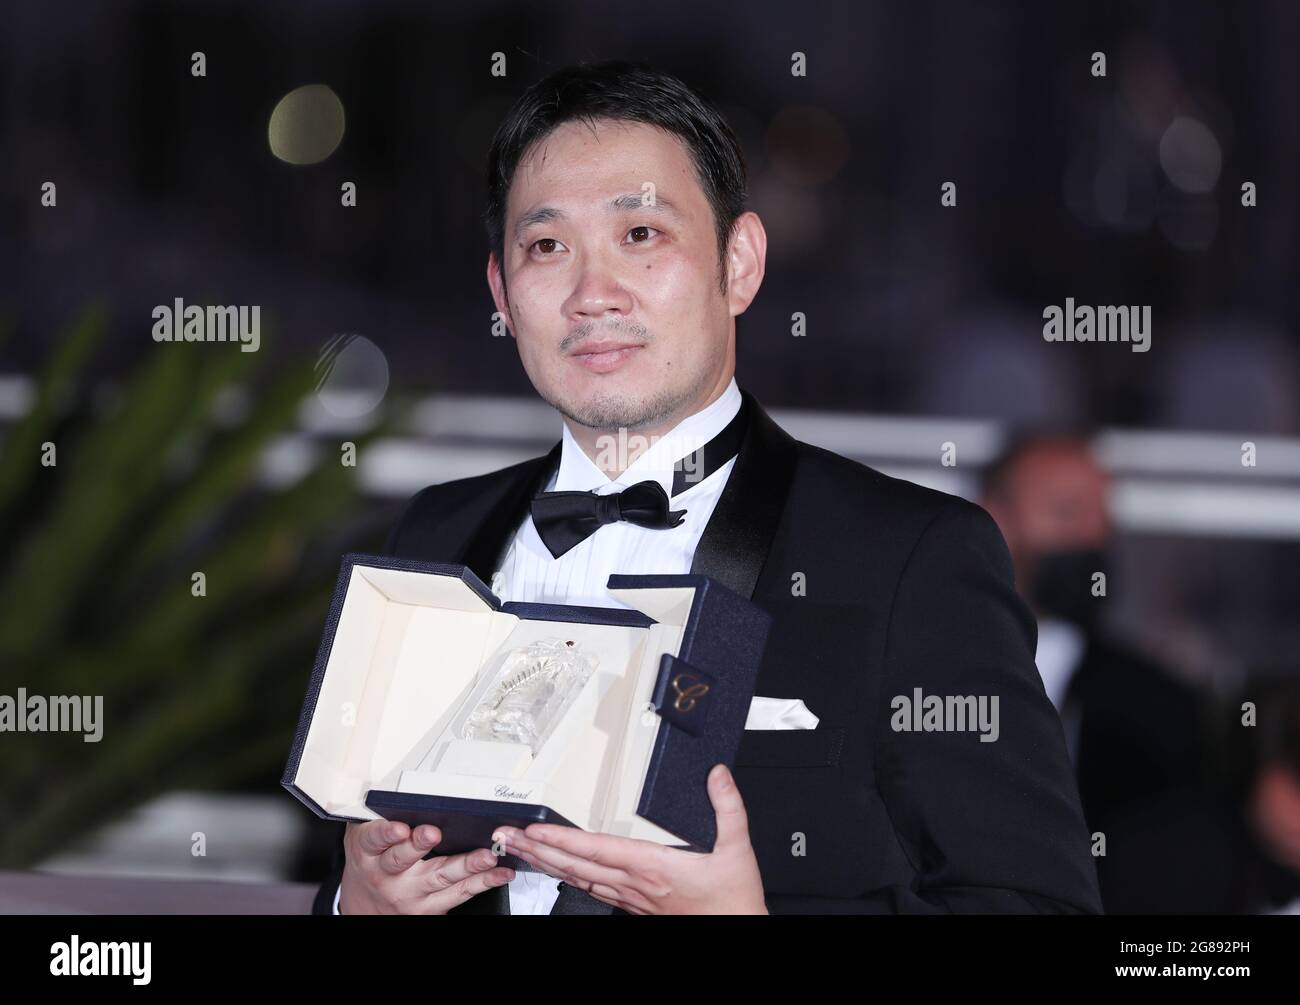 Cannes, France. 17th July, 2021. Ryusuke Hamaguchi, winner of the award for best screenplay for the film 'Drive My Car', poses during a photocall at the 74th Cannes Film Festival in Cannes, France, July 17, 2021. The 74th Cannes Film Festival concluded here on Saturday. Credit: Gao Jing/Xinhua/Alamy Live News Stock Photo